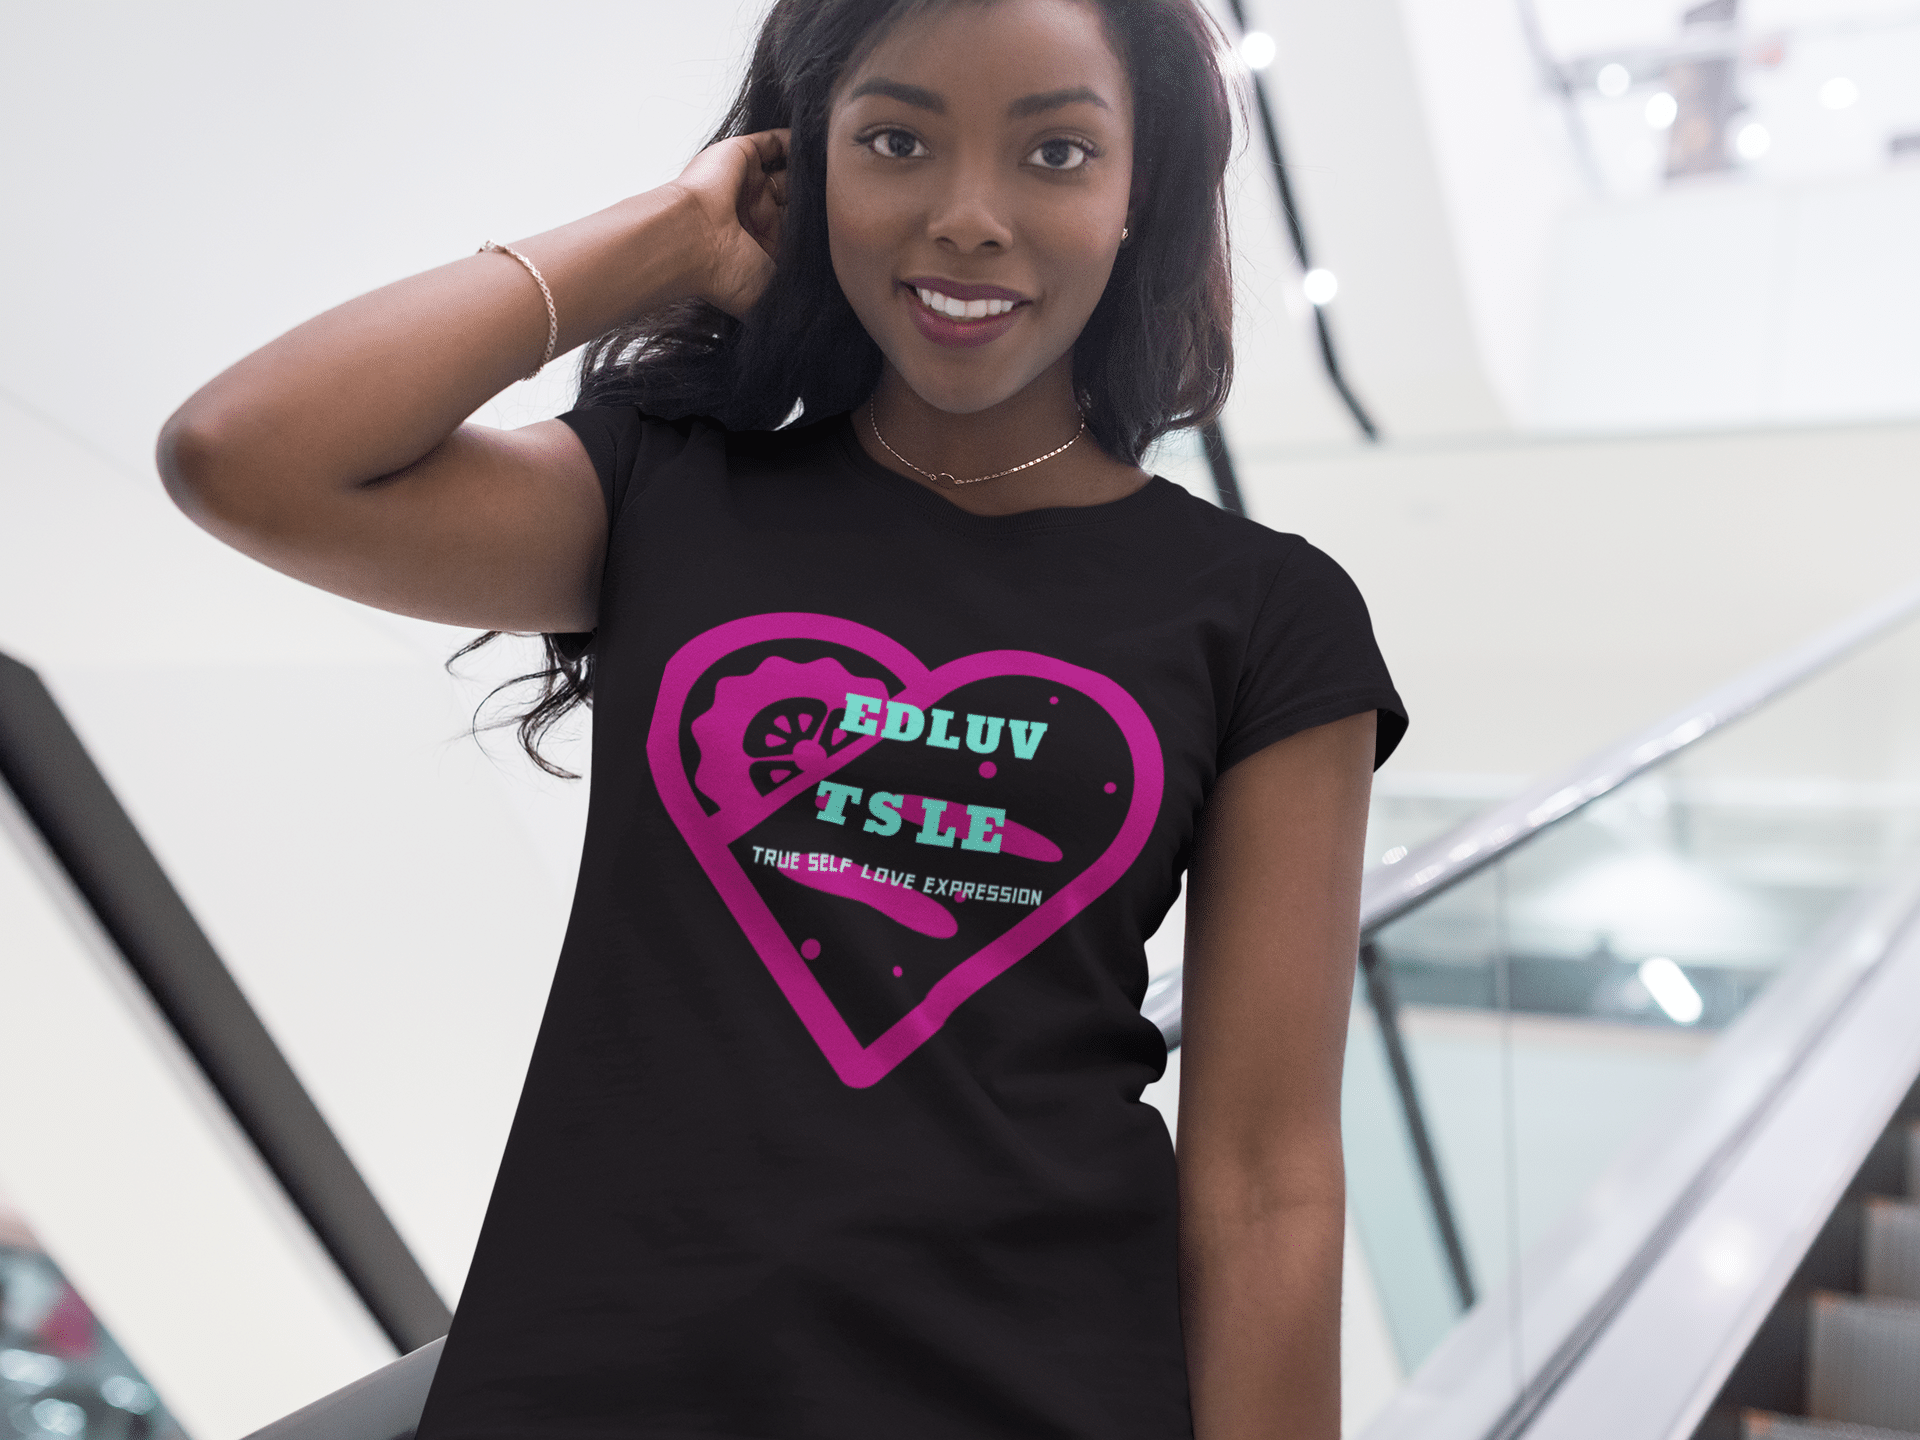 A woman wearing a black t-shirt with pink heart and words.